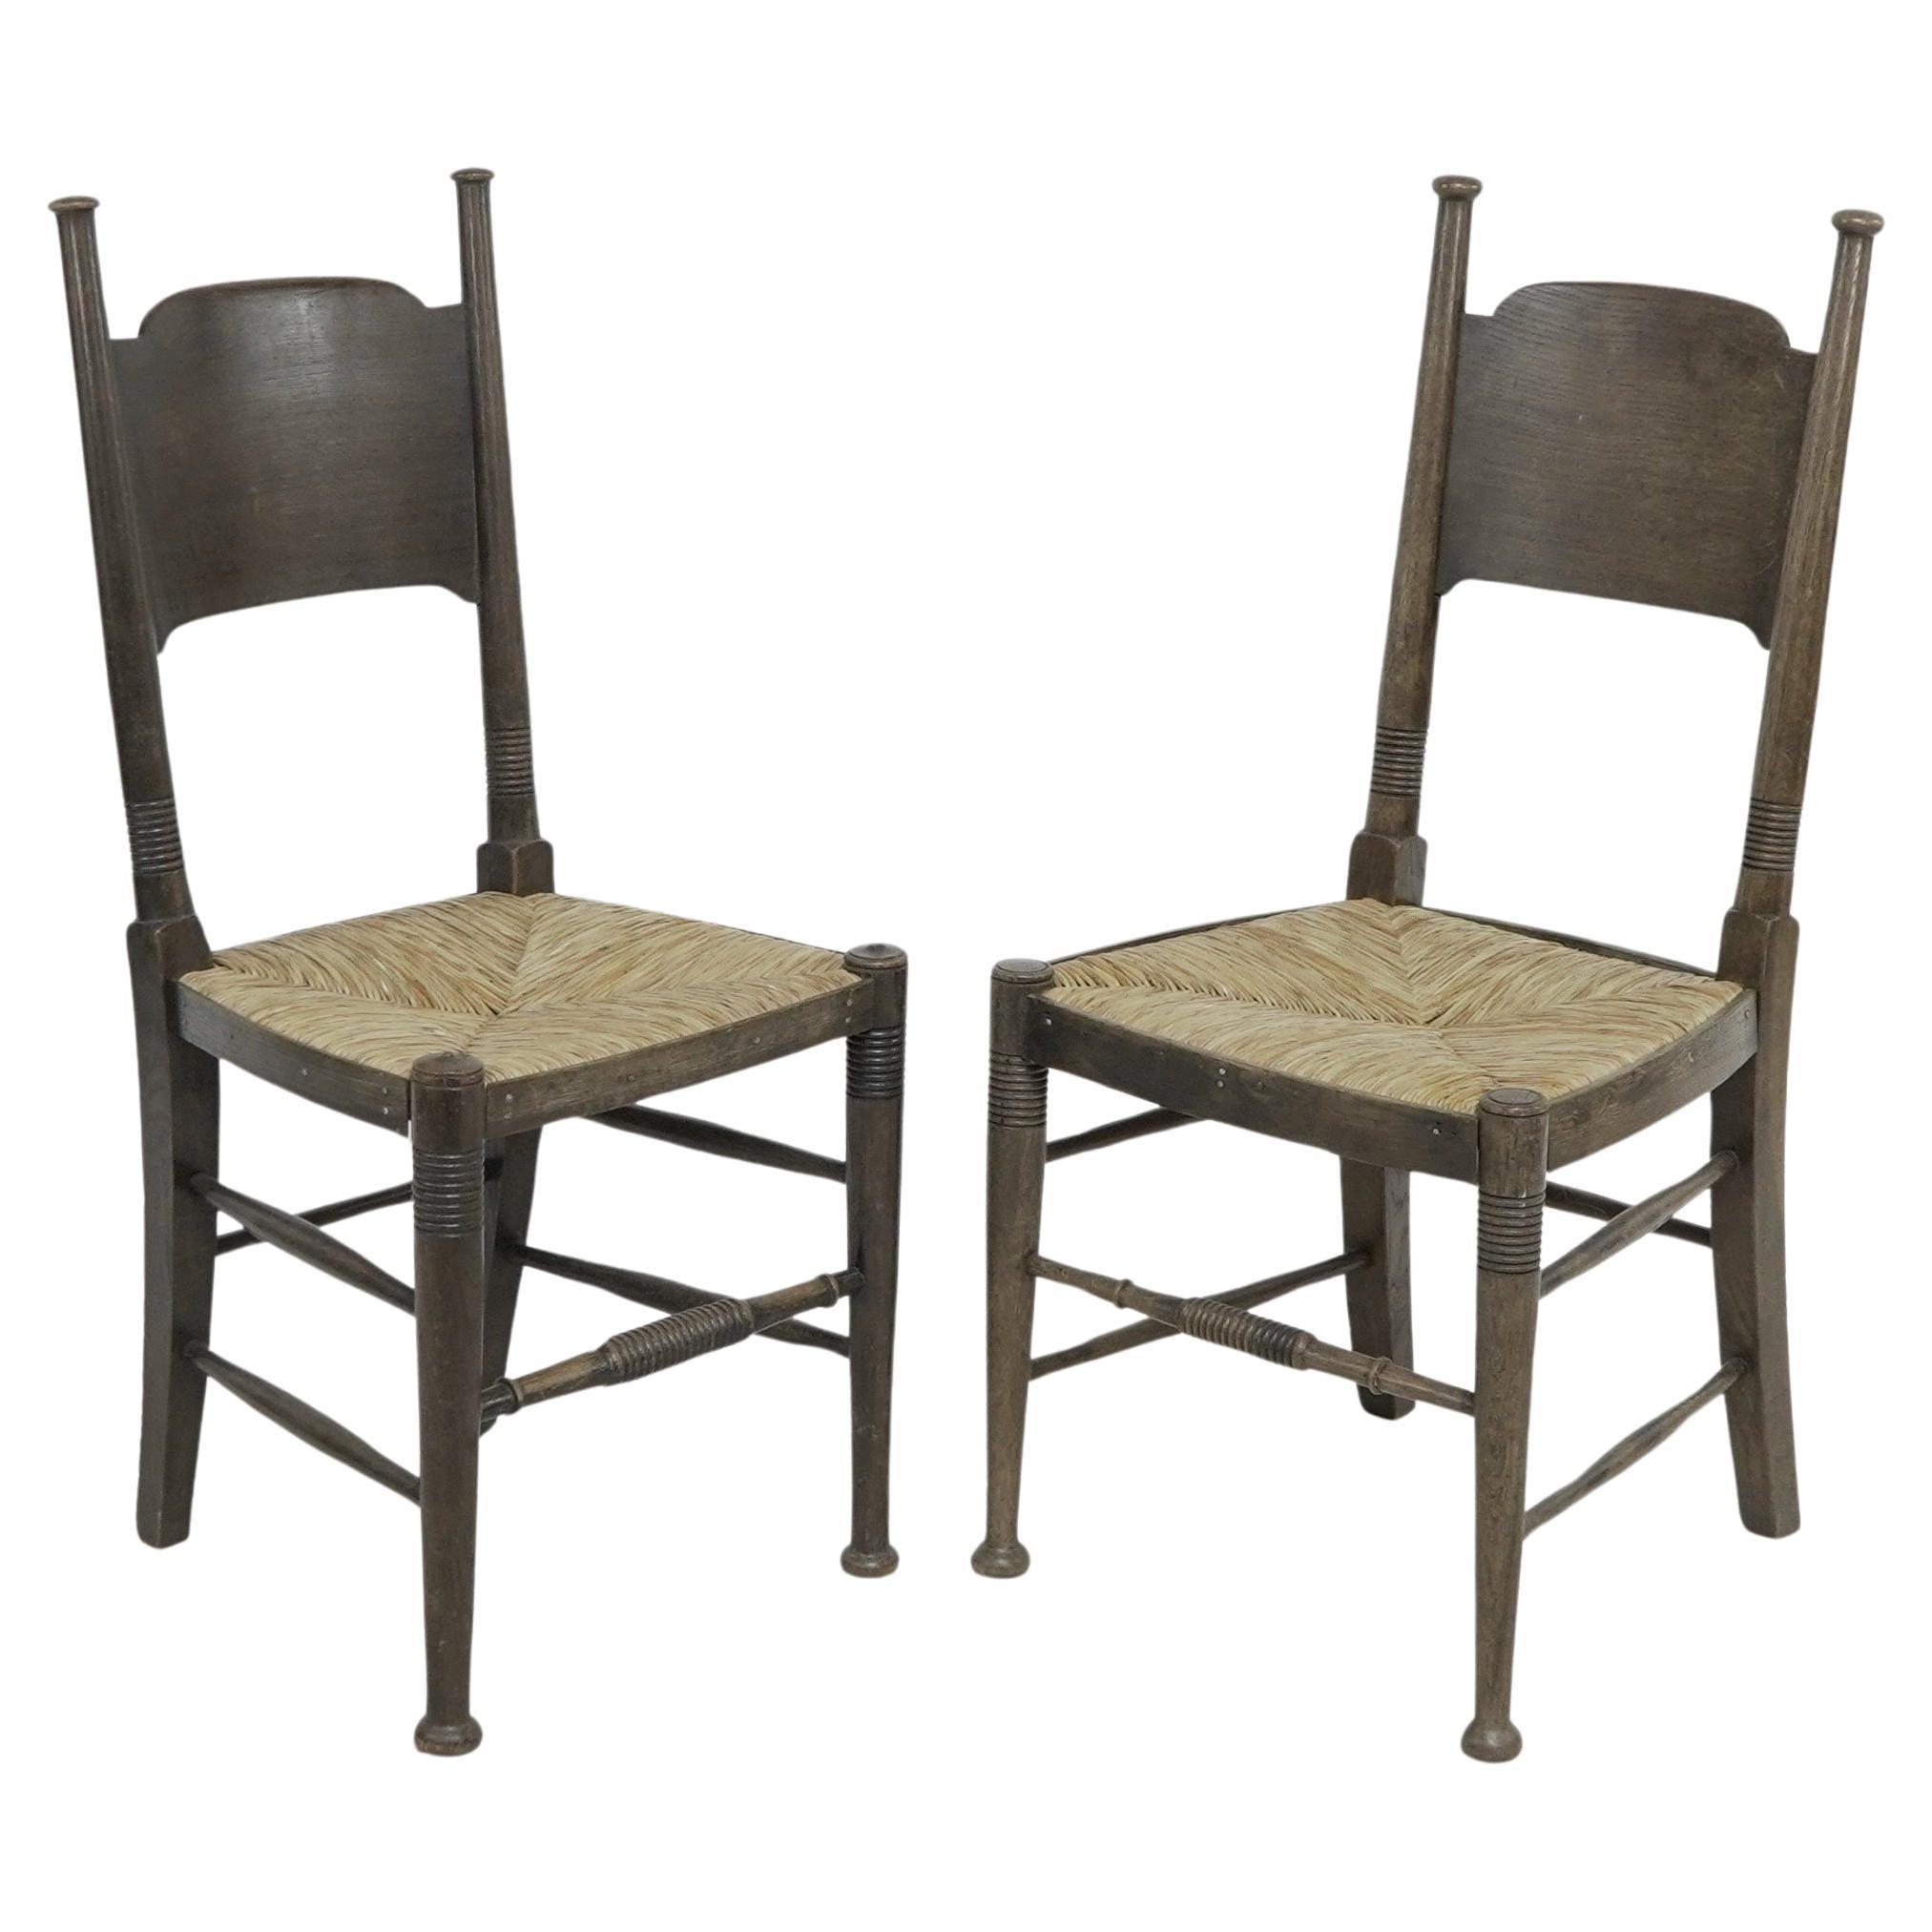 William Birch, retailed by Liberty & Co. Pair of Arts & Crafts oak dining chairs